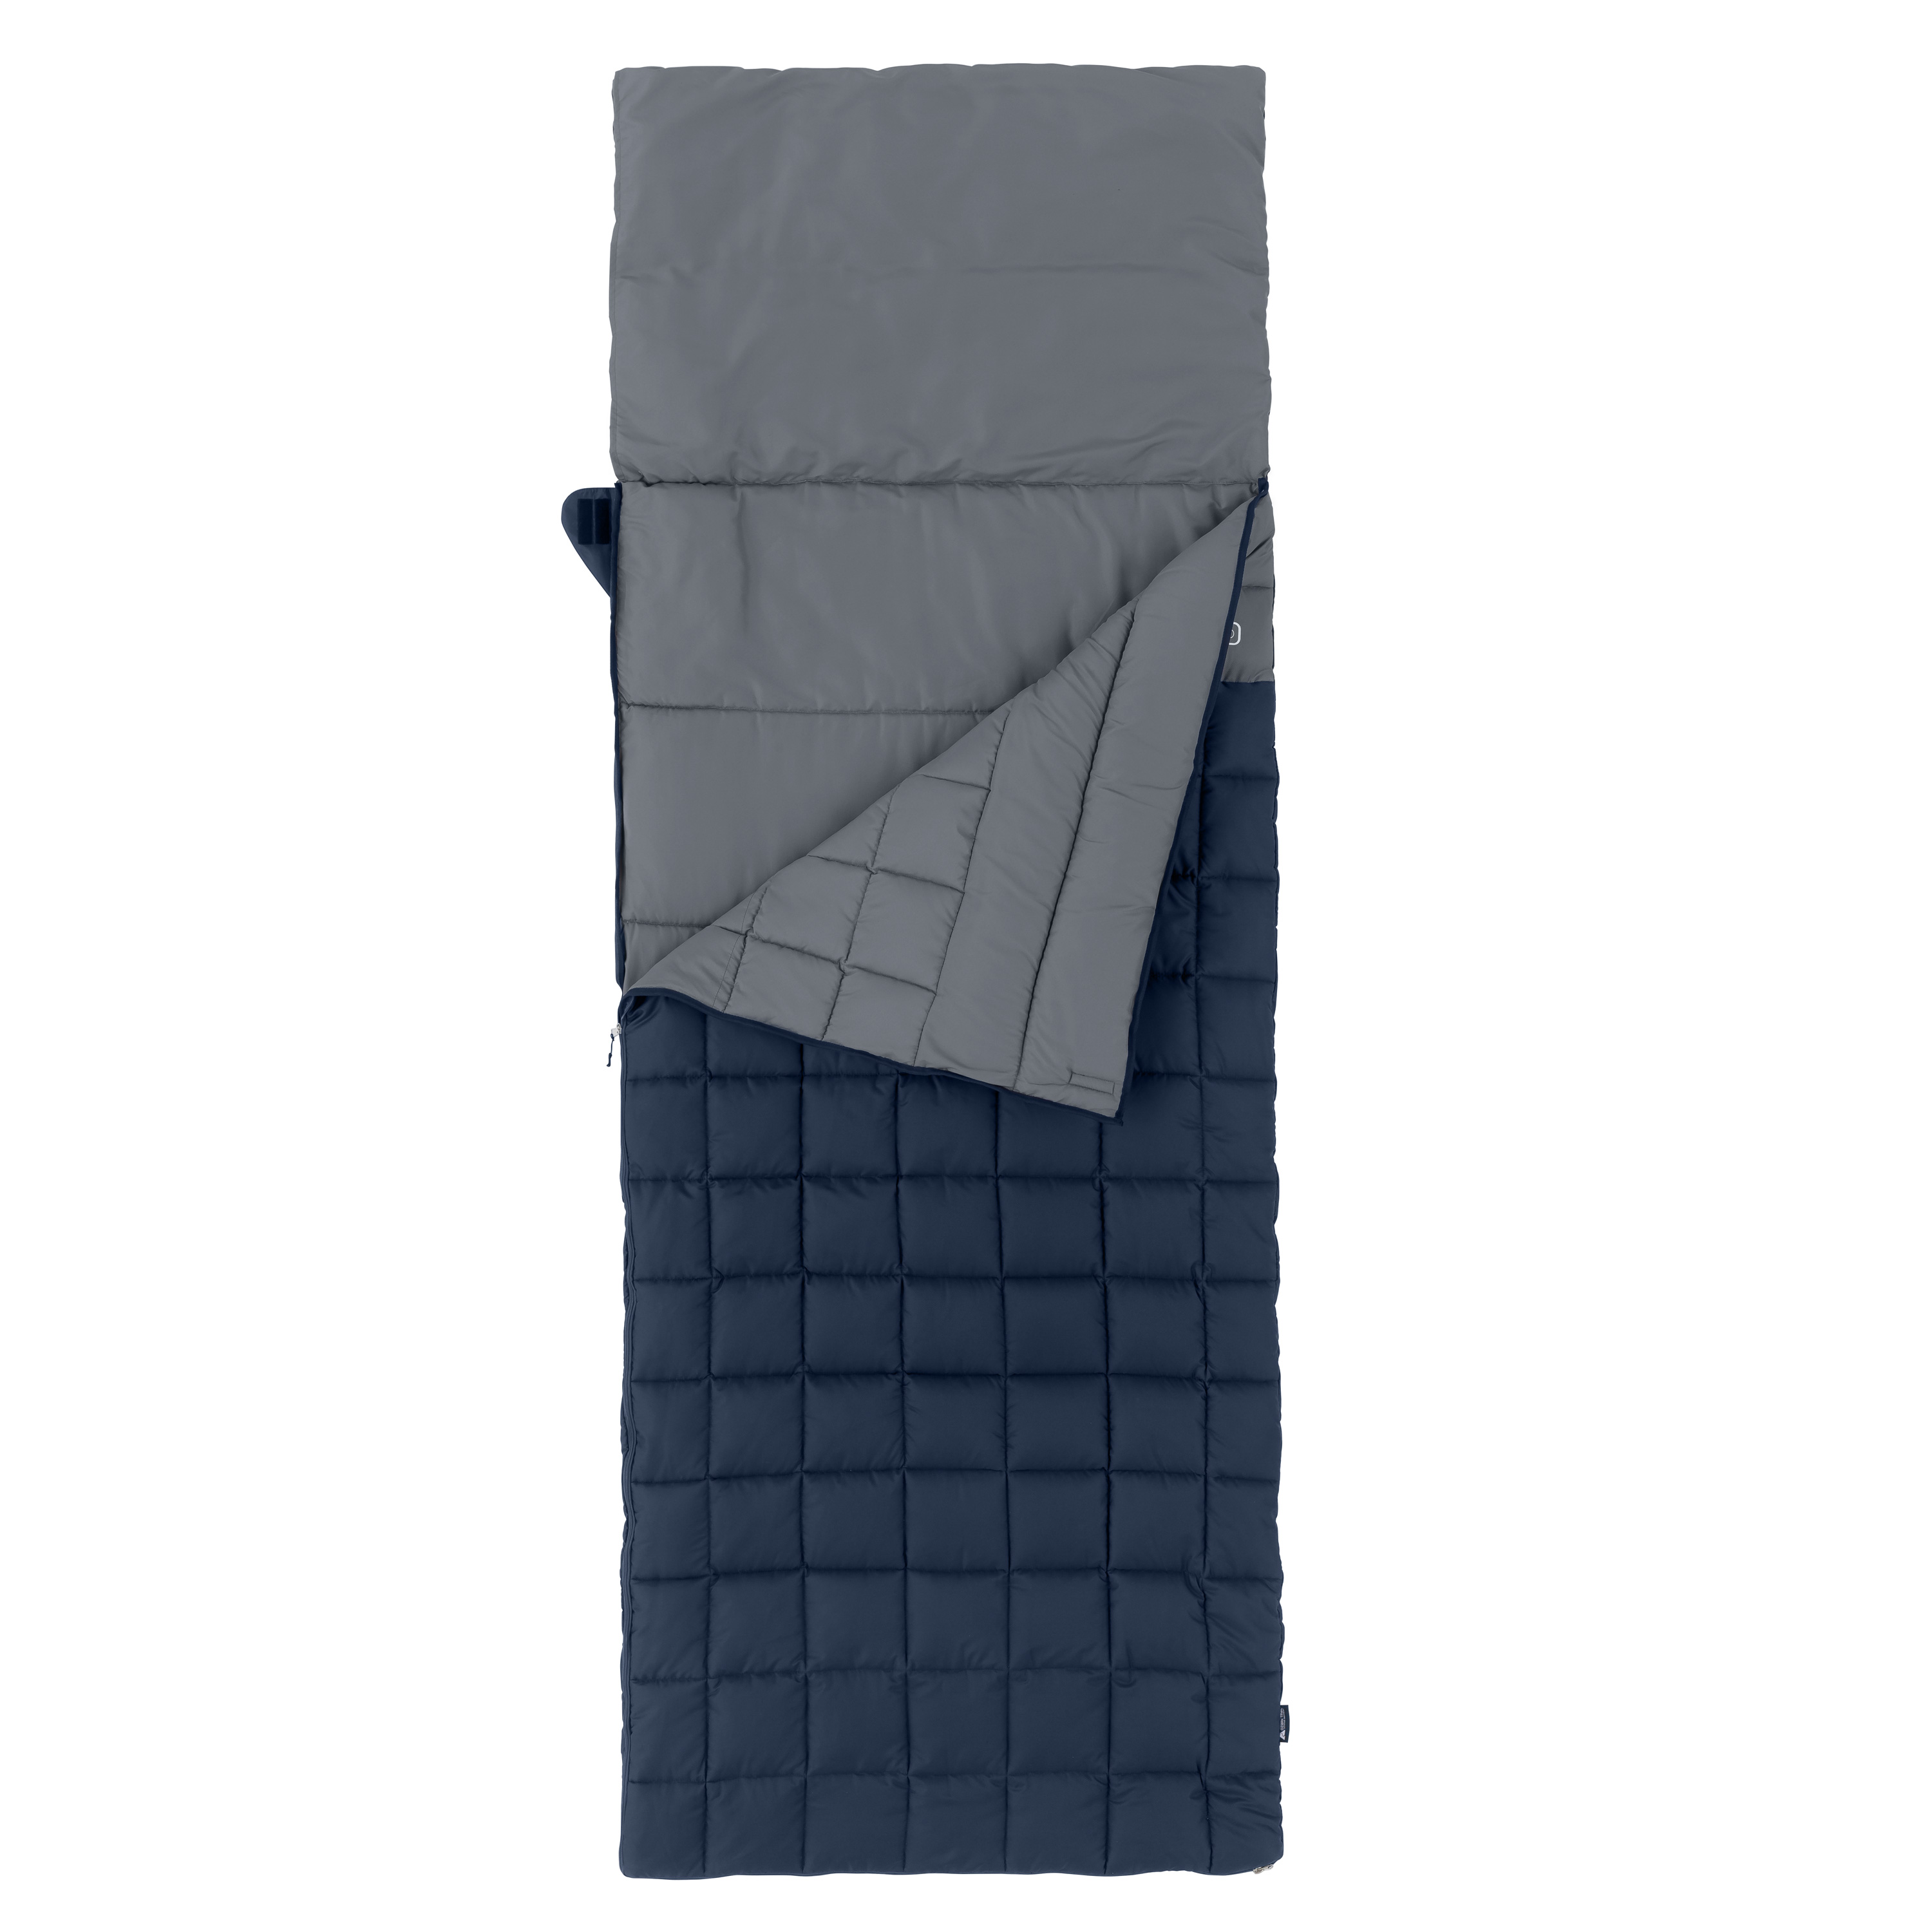 Ozark Trail 40F Weighted Adult Sleeping Bag – Navy & Gray (Size 95 in. x 34 in.) - image 2 of 12